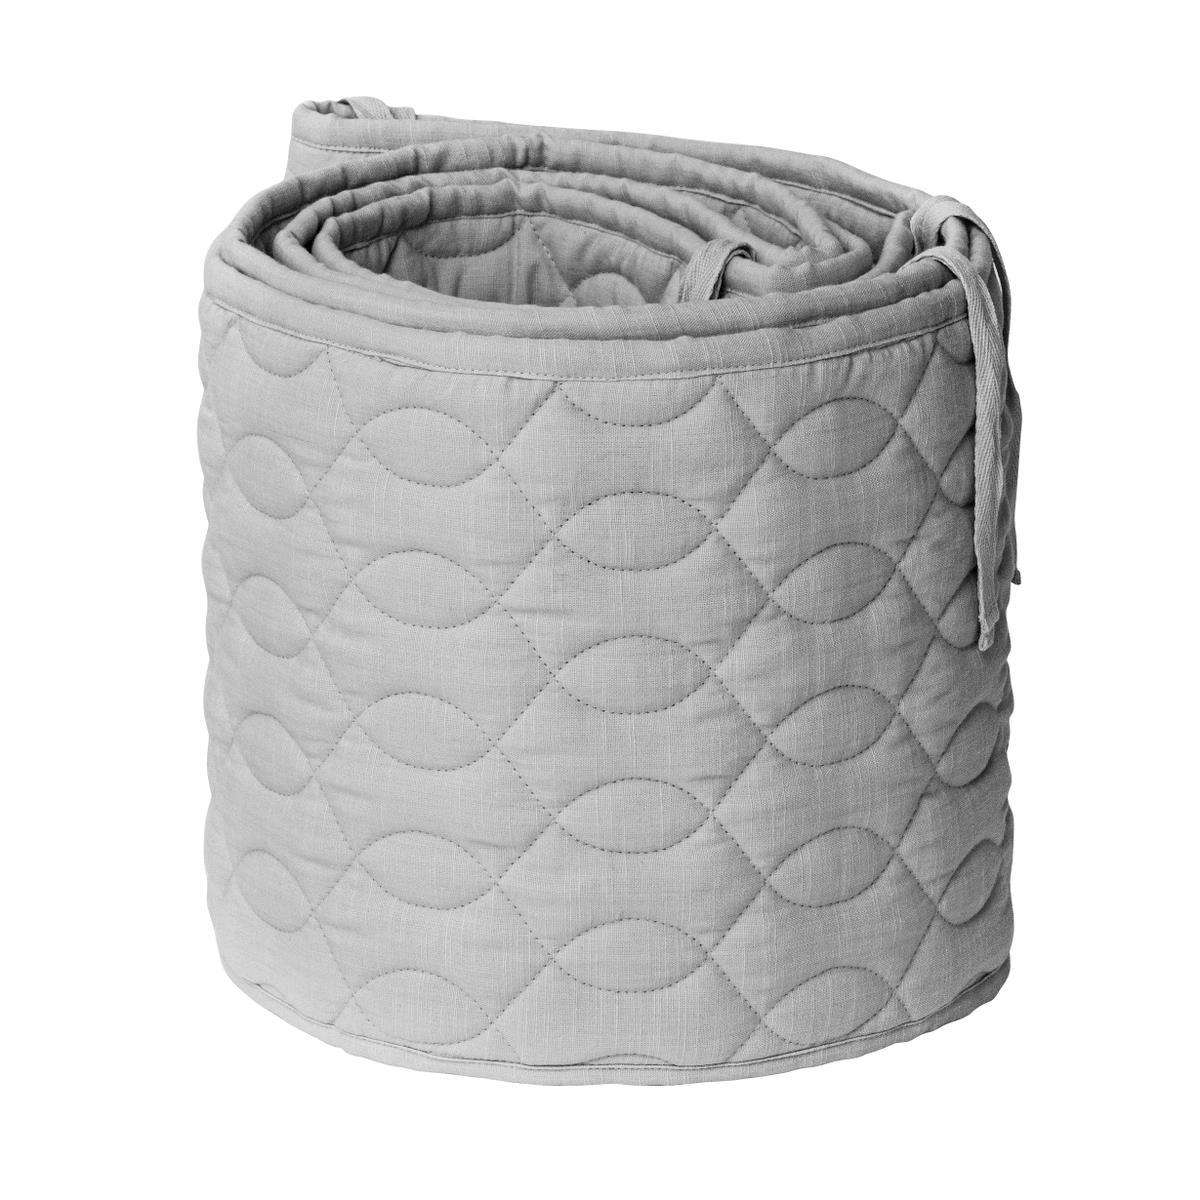 Sebra Quilted Baby Cot Bumper in Elephant Grey - Scandibørn